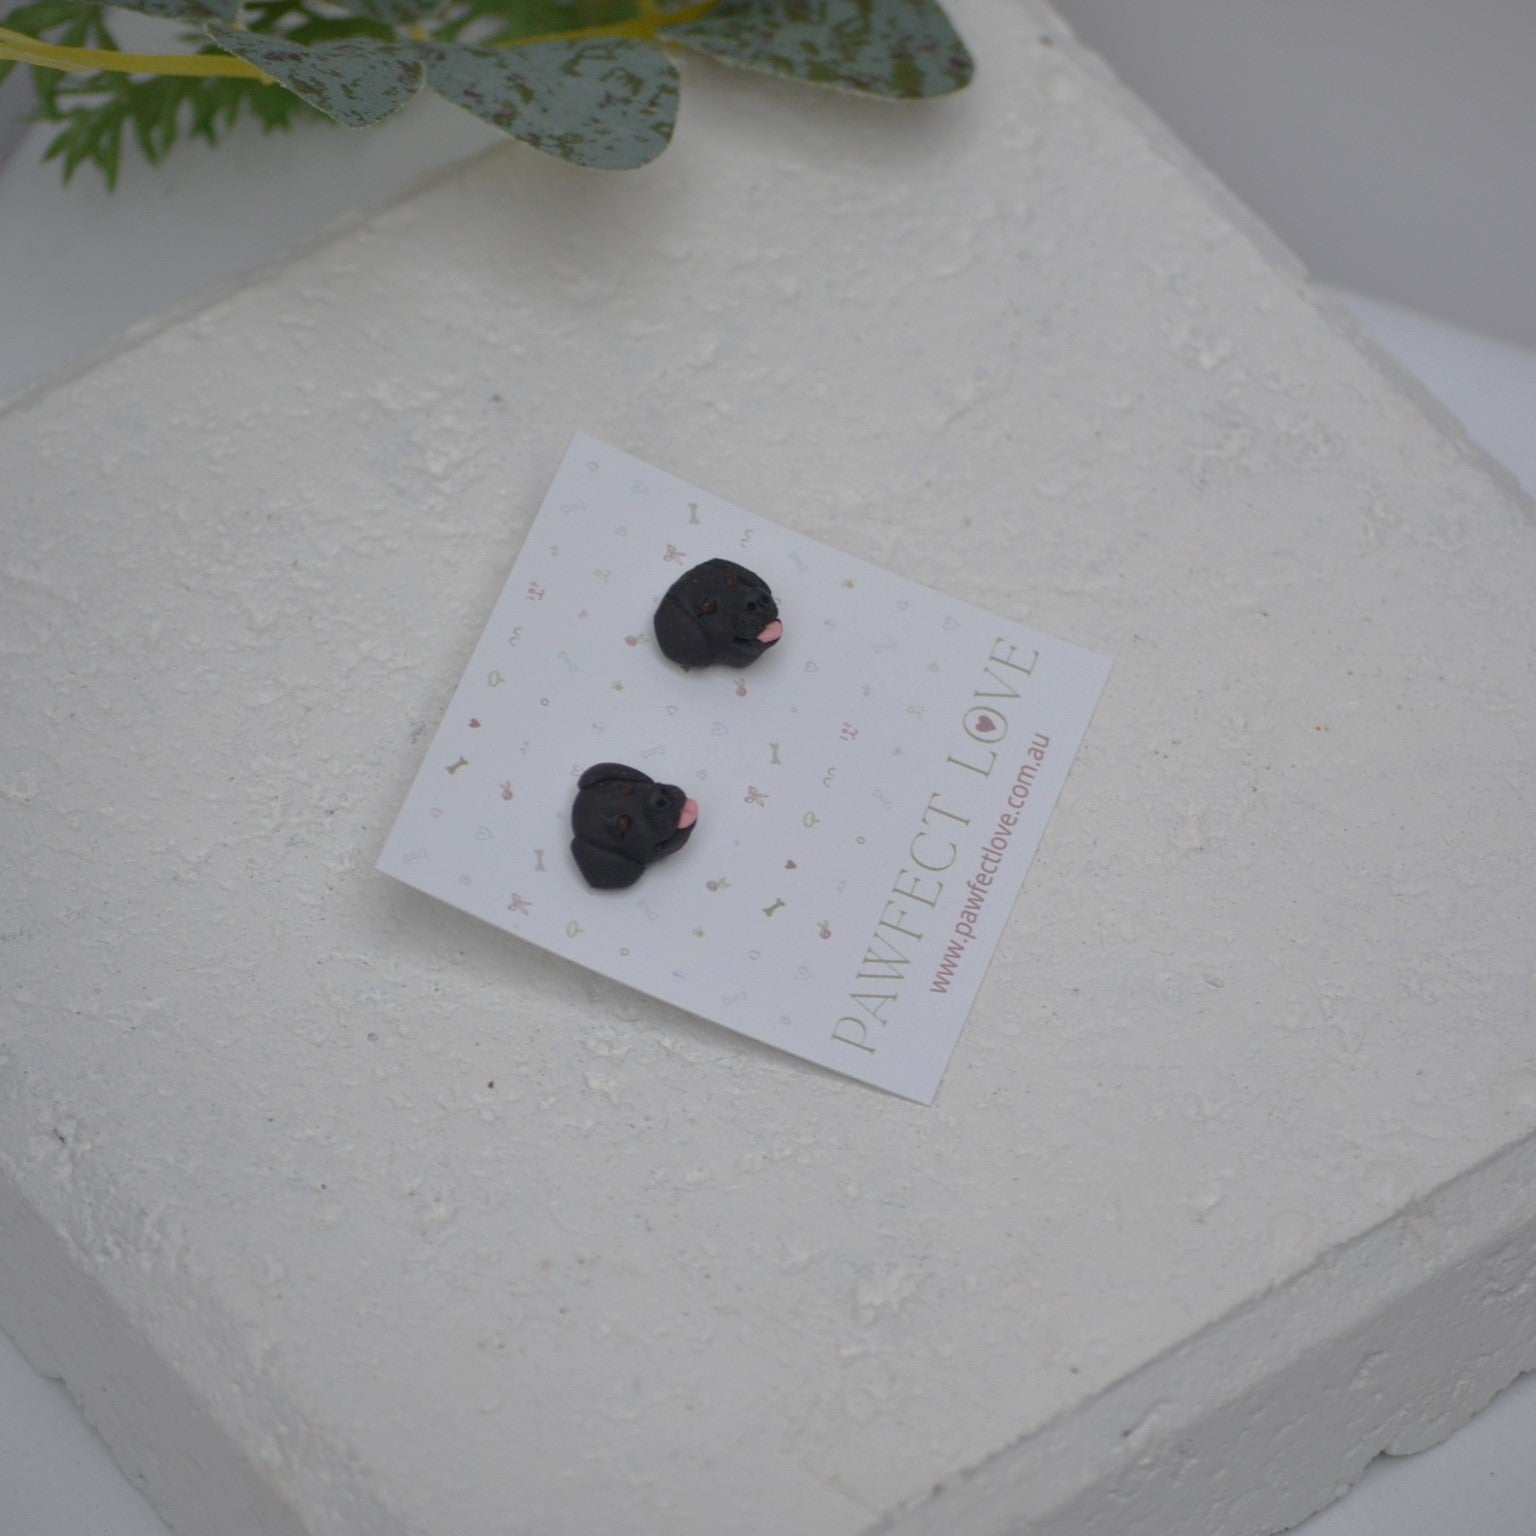 Handmade black labrador stud earrings by Pawfect Love, positioned on white paver background